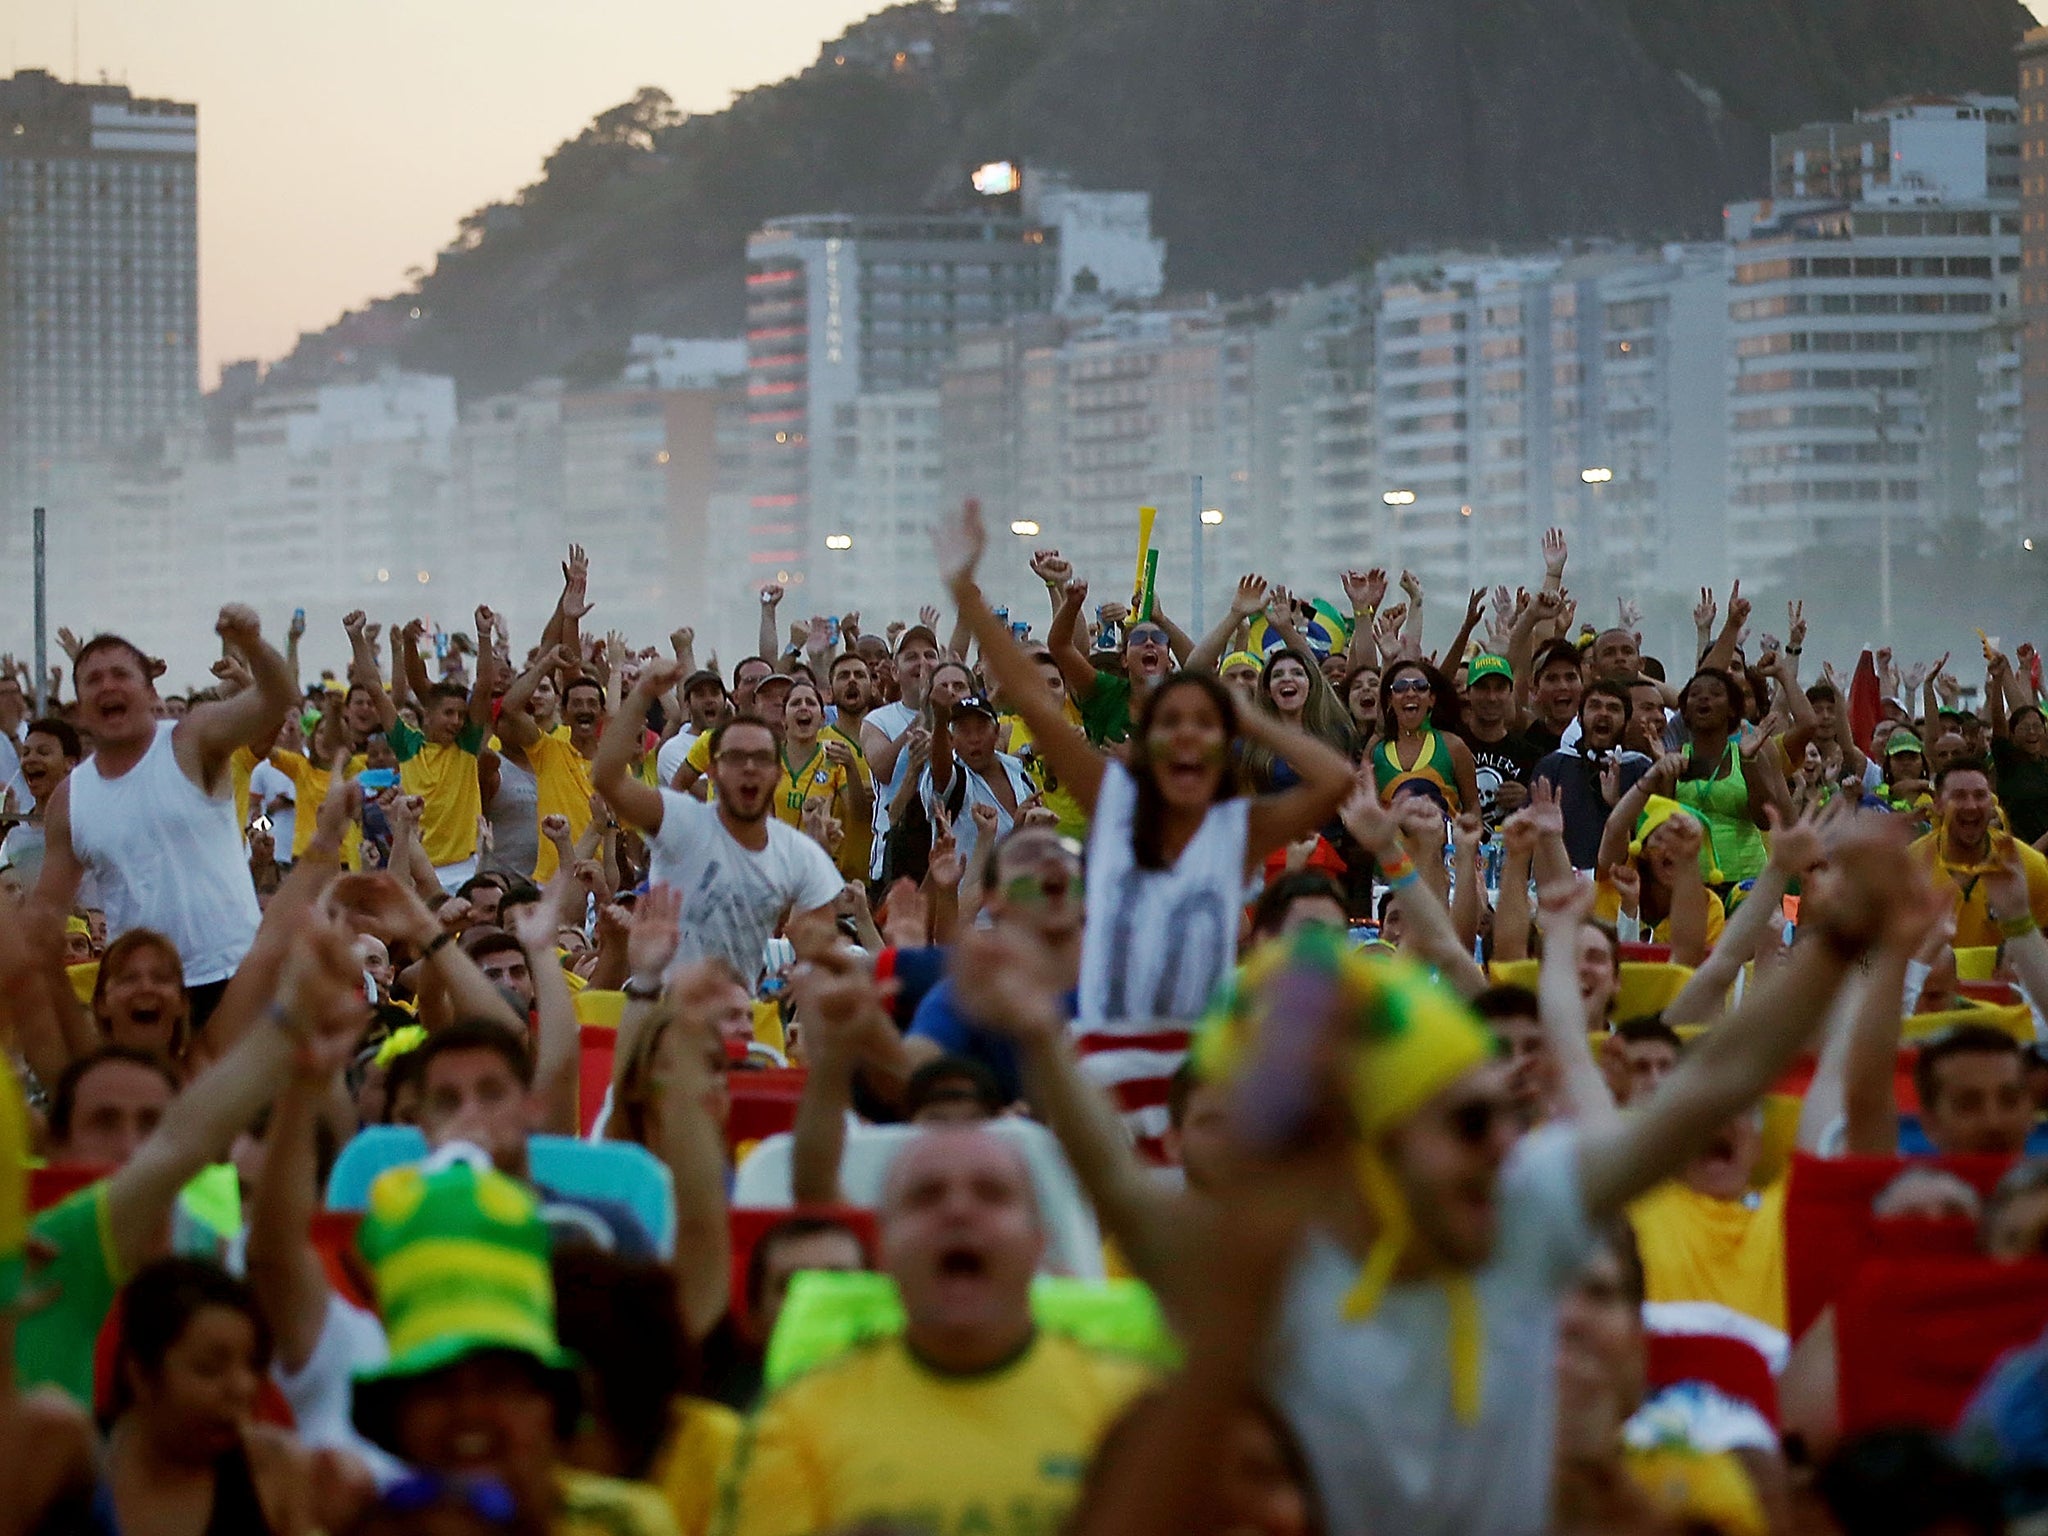 Brazil fans on Copacabana Beach cheer after Brazil scored its first goal while watching a live broadcast of the Brazil-Cameroon match